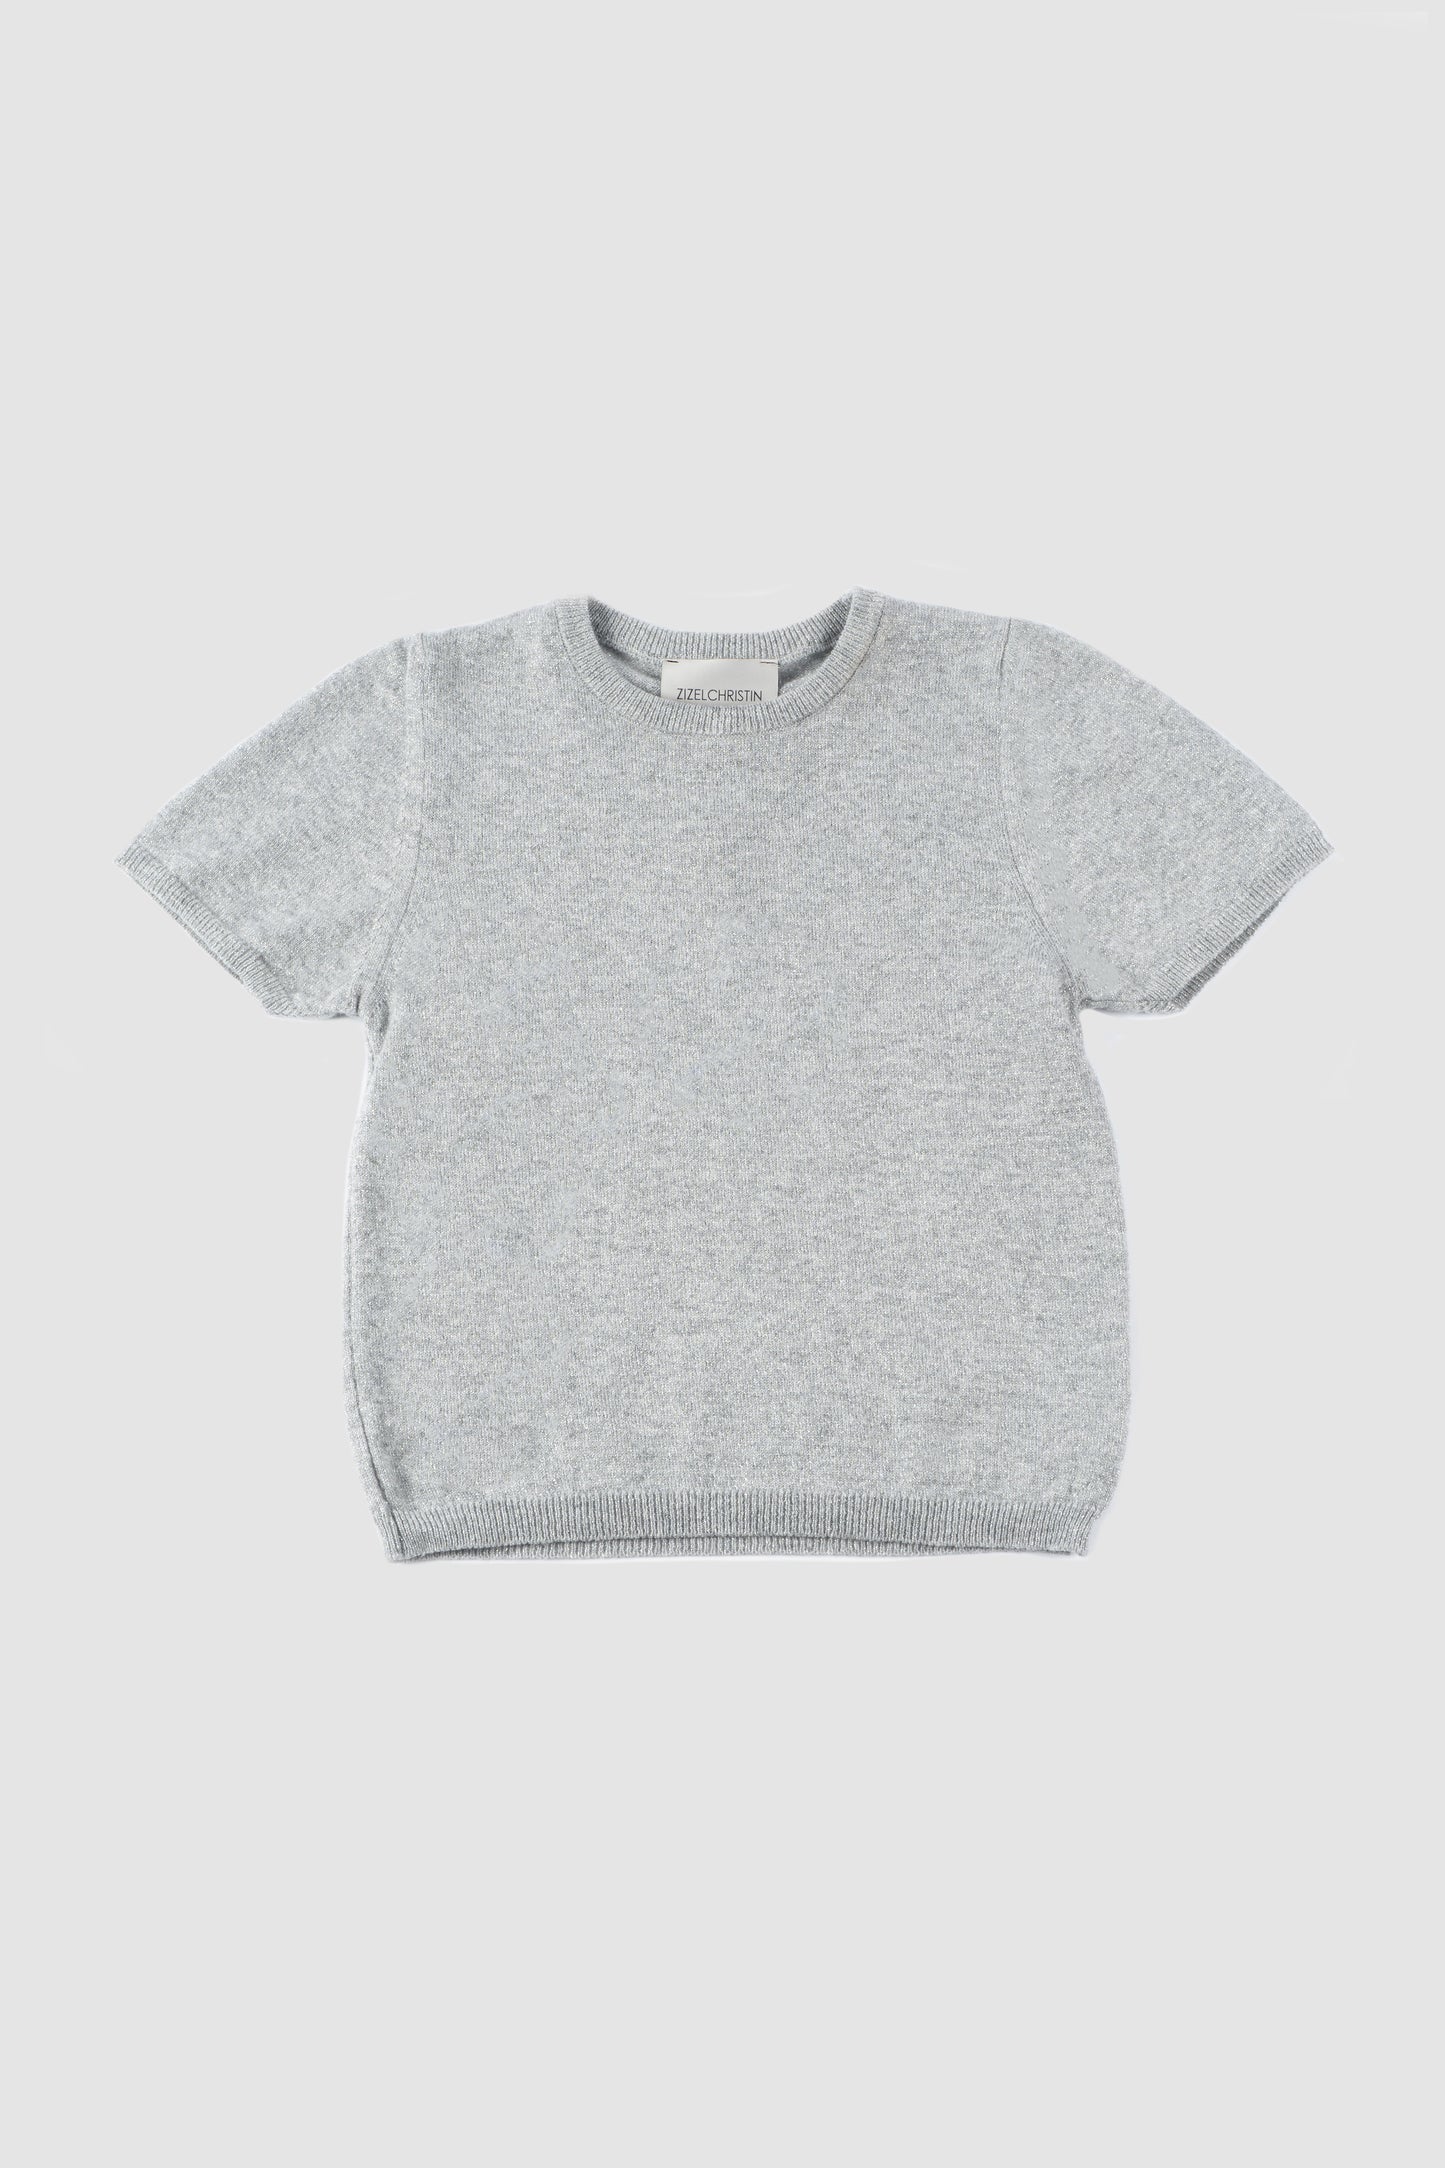 Wool Cashmere top